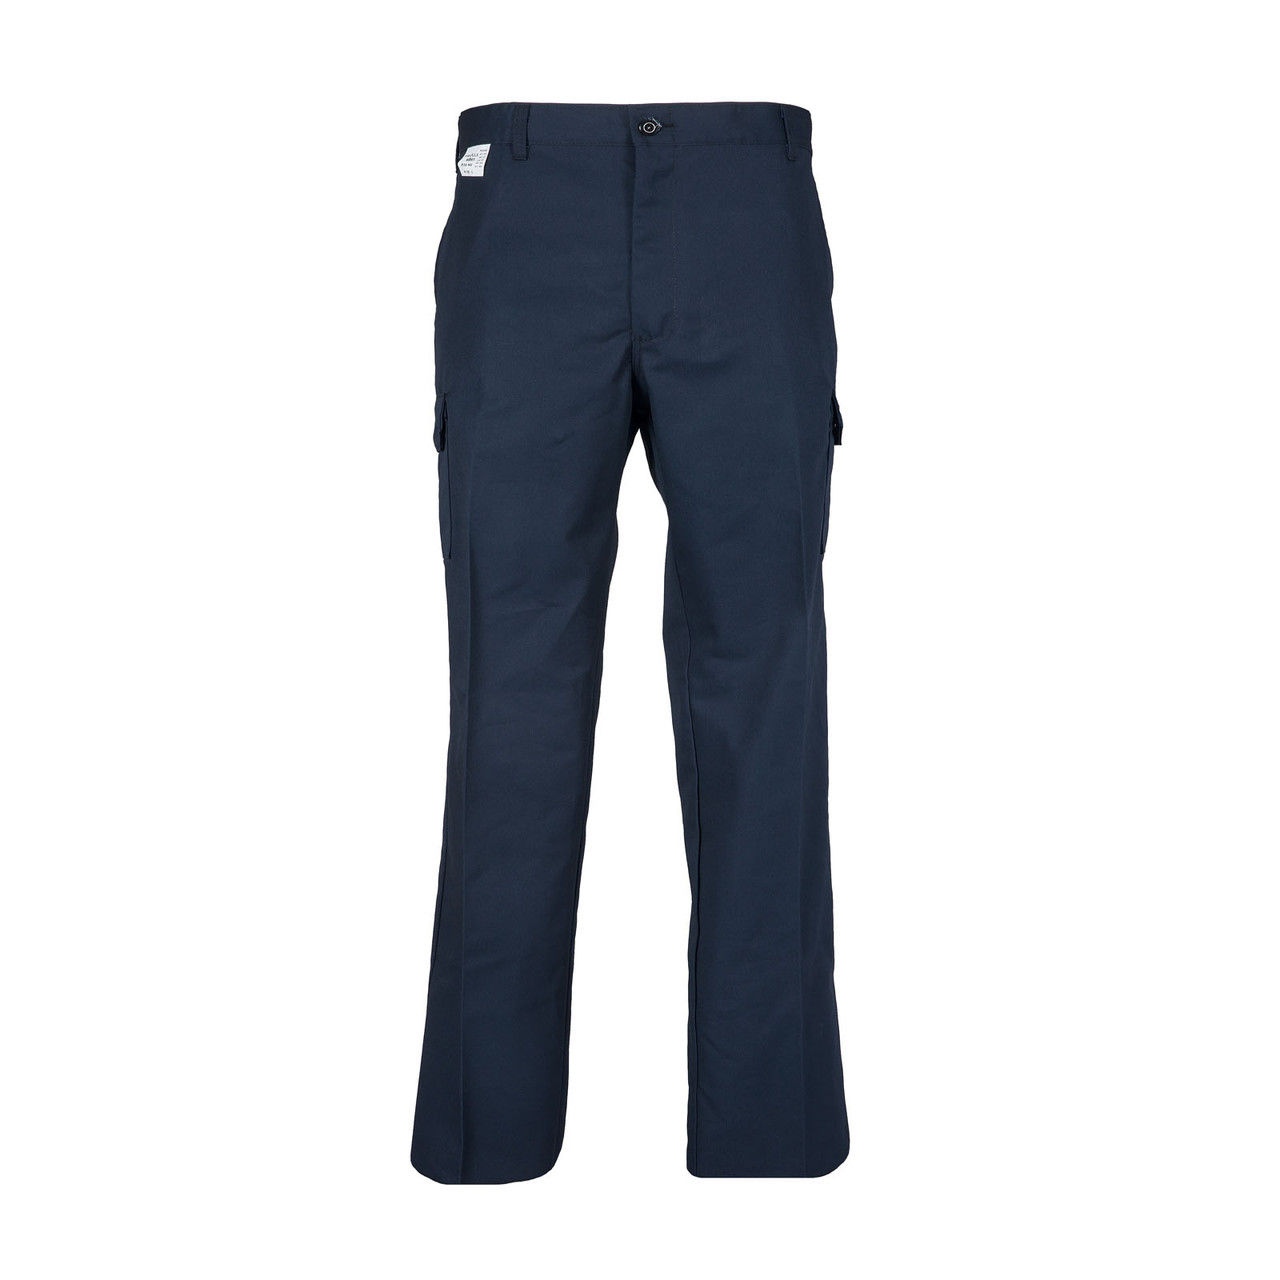 Does the P24NV navy blue work pants offer any customization options?